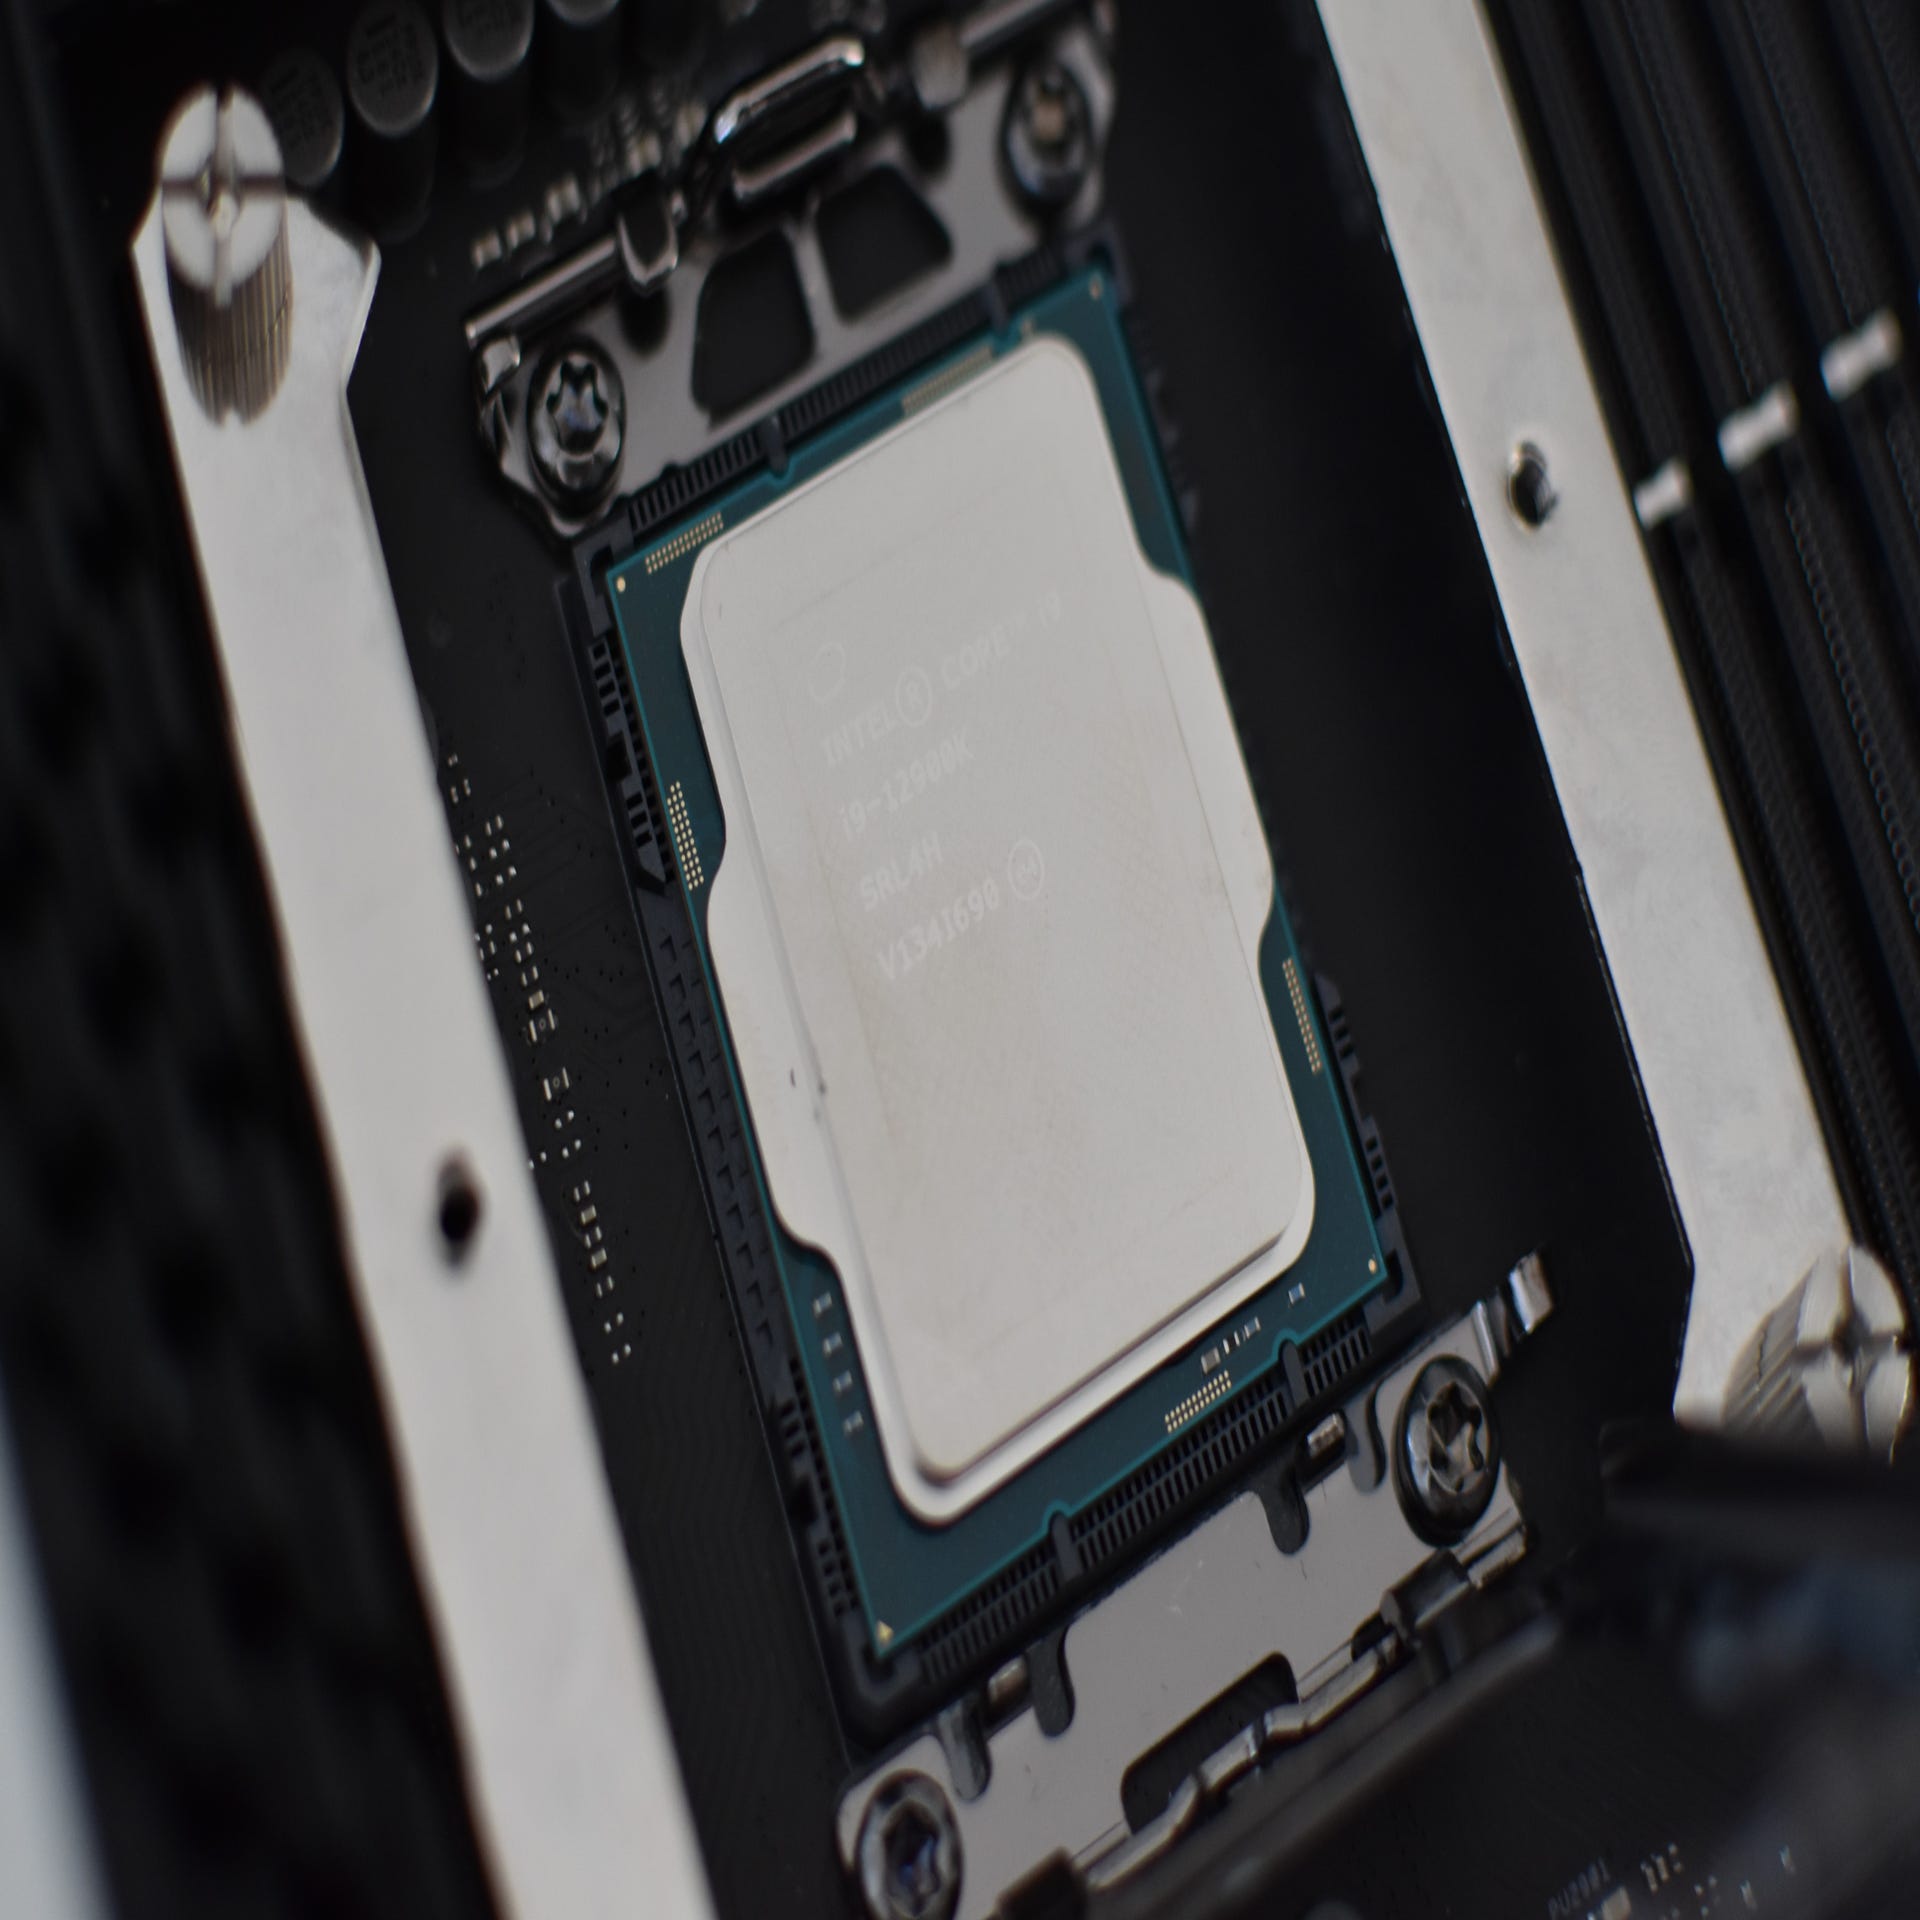 The Intel Core i9-12900K scales crazy heights with a new extreme